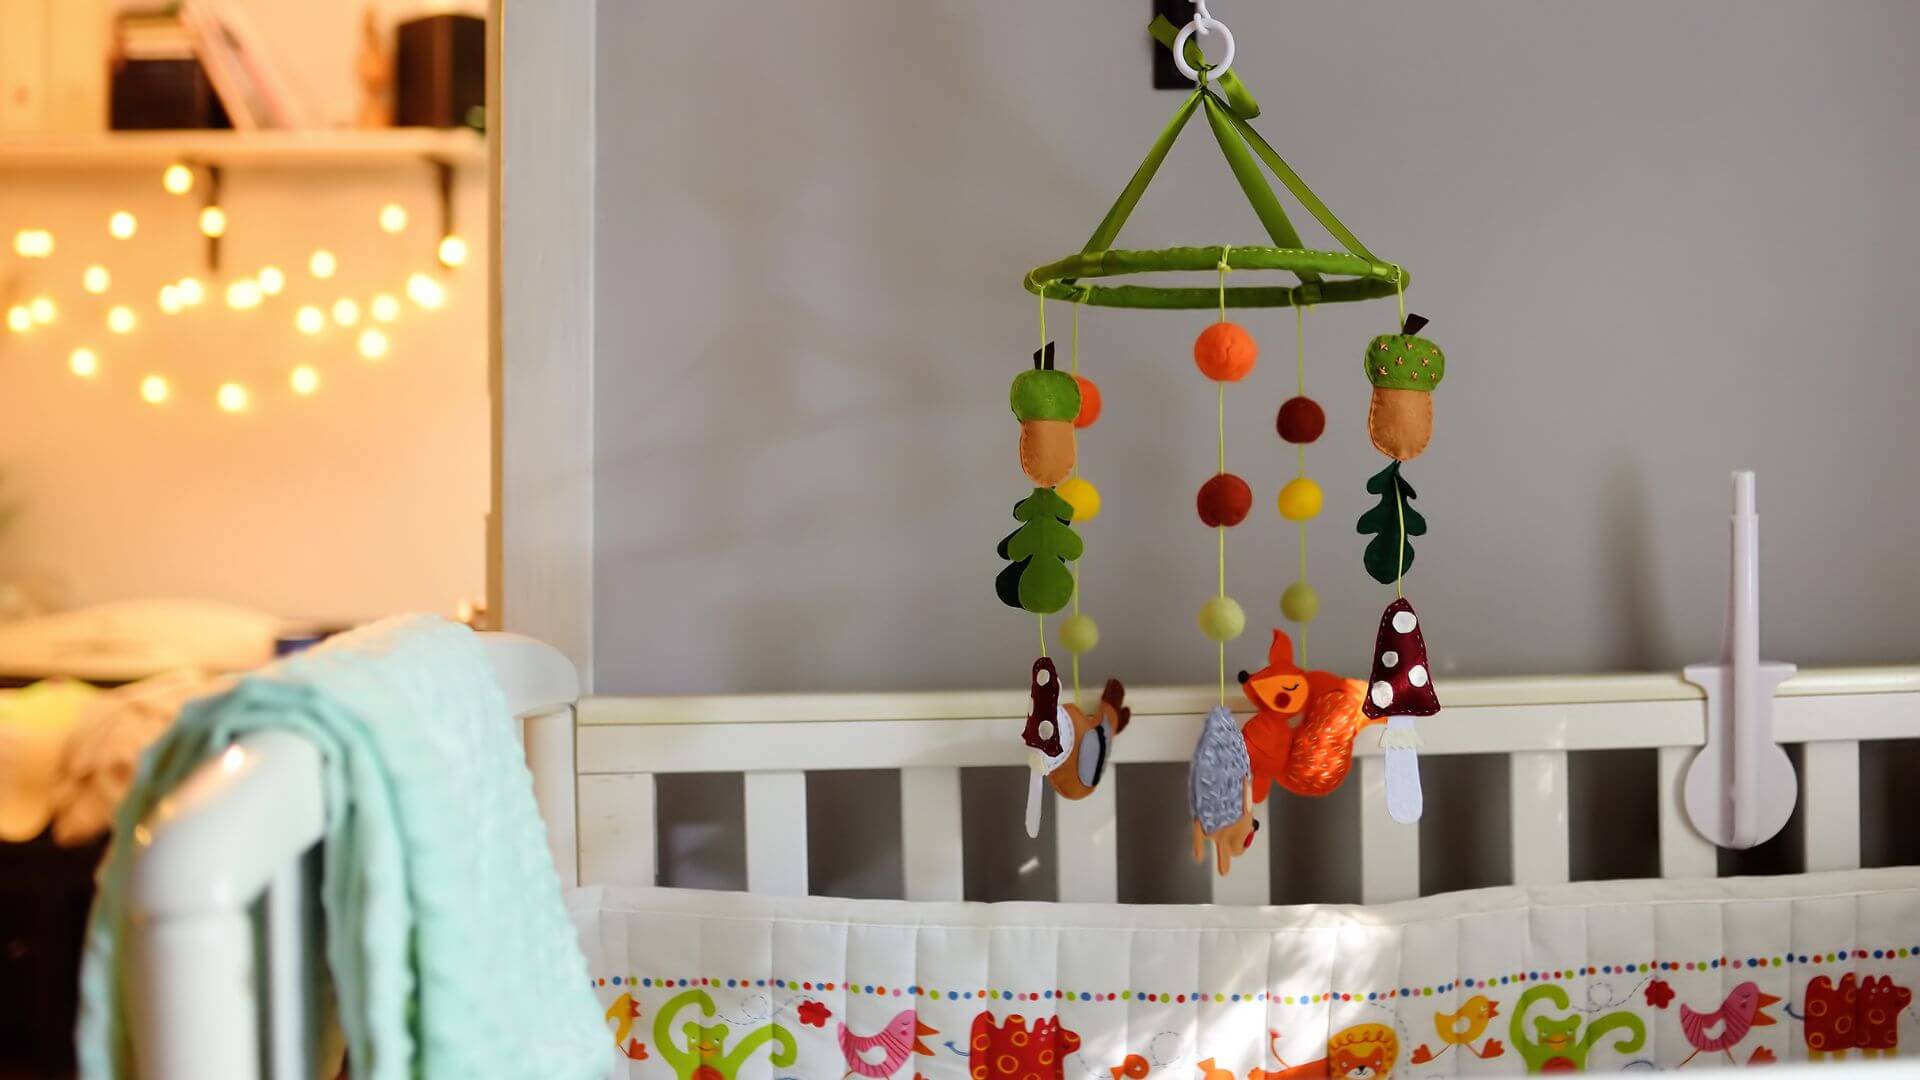 Things You Need When Planning Your Baby's Nursery